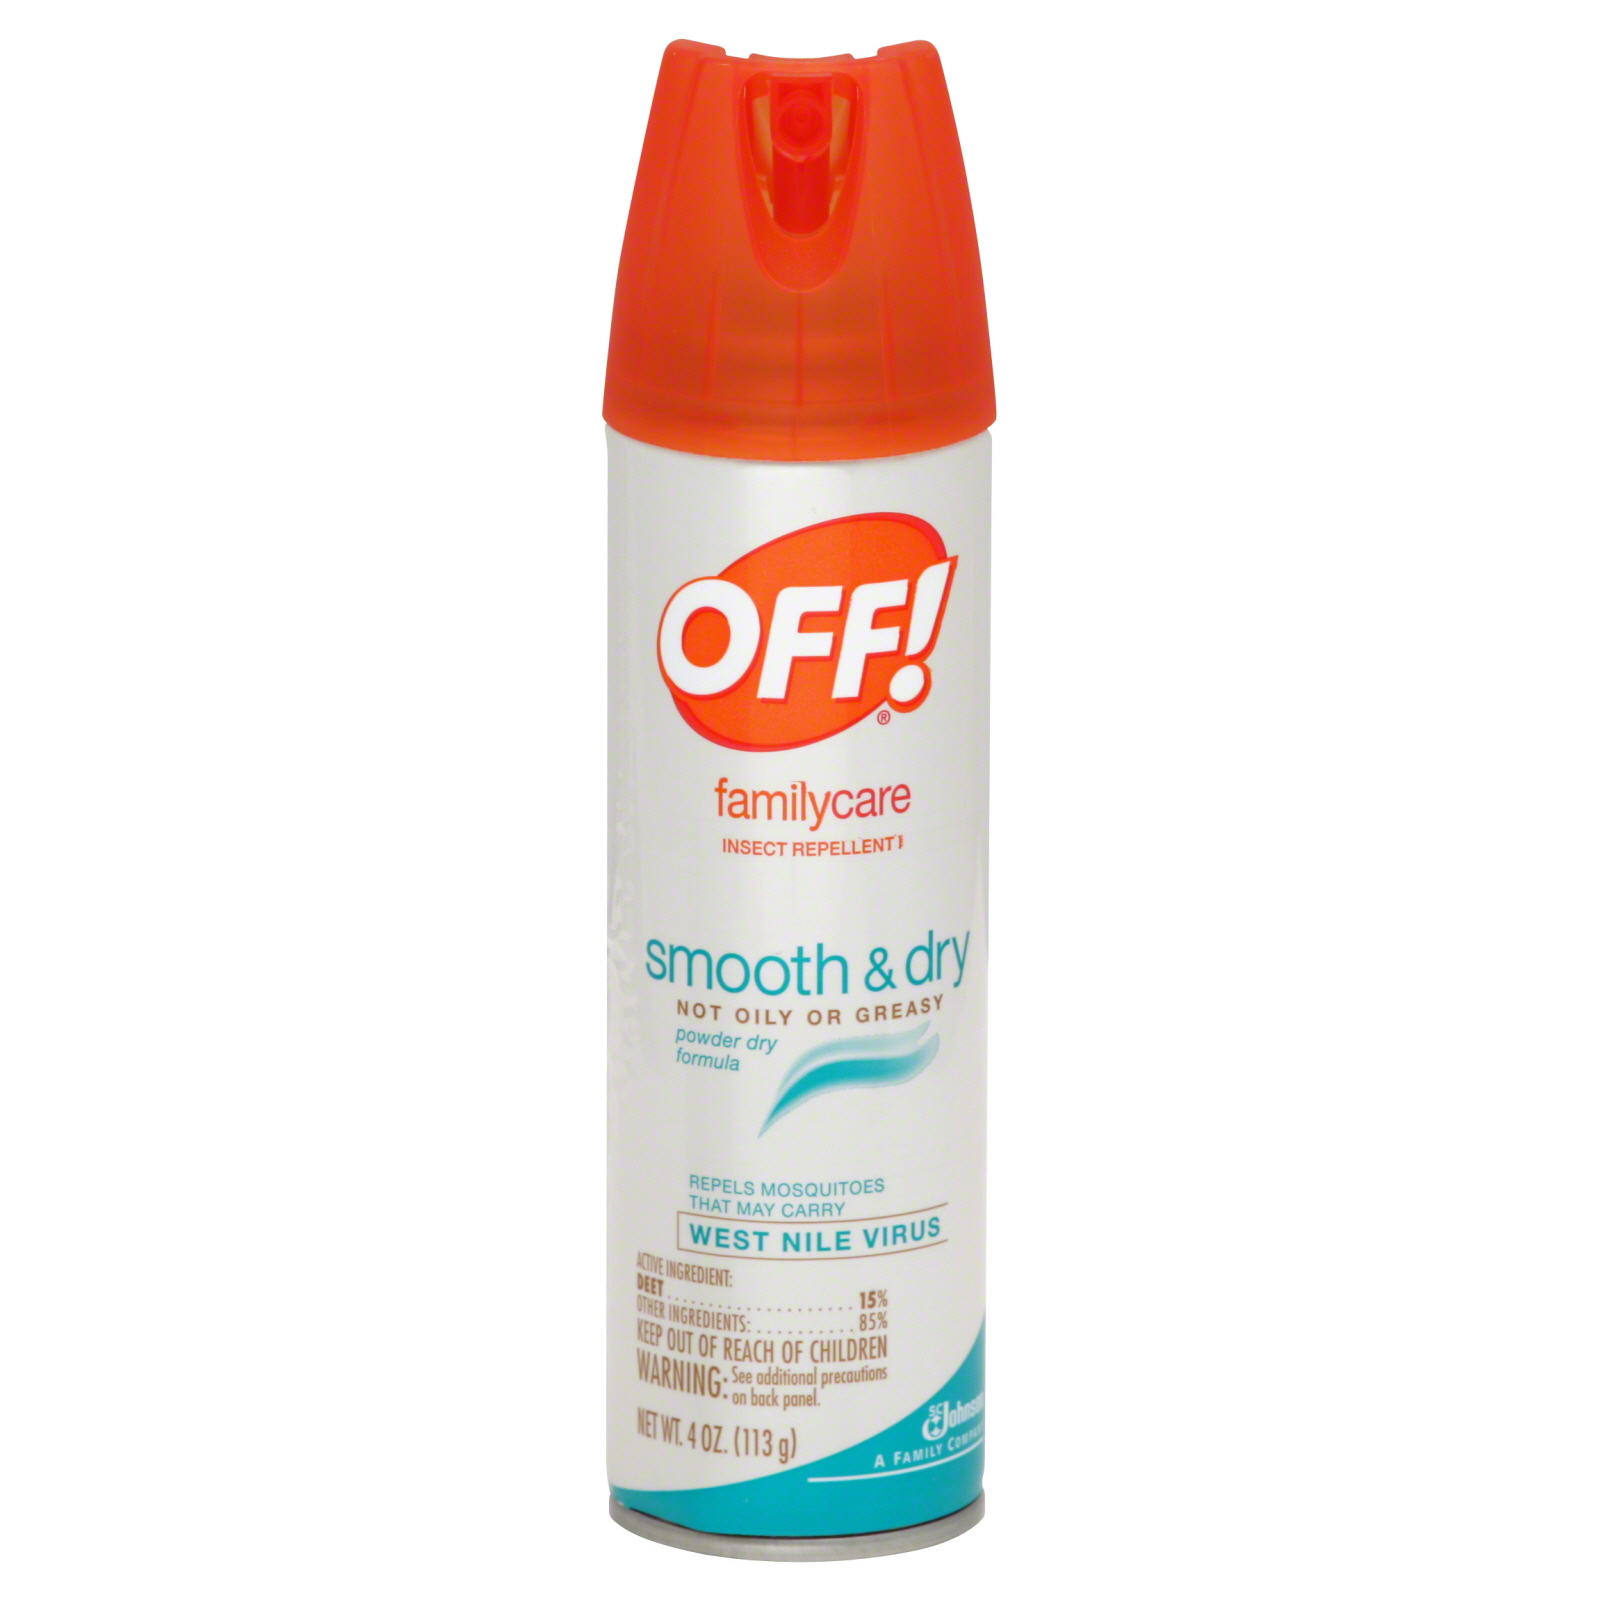 Off! FamilyCare Insect Repellent, Smooth & Dry, 4 oz (113 g)